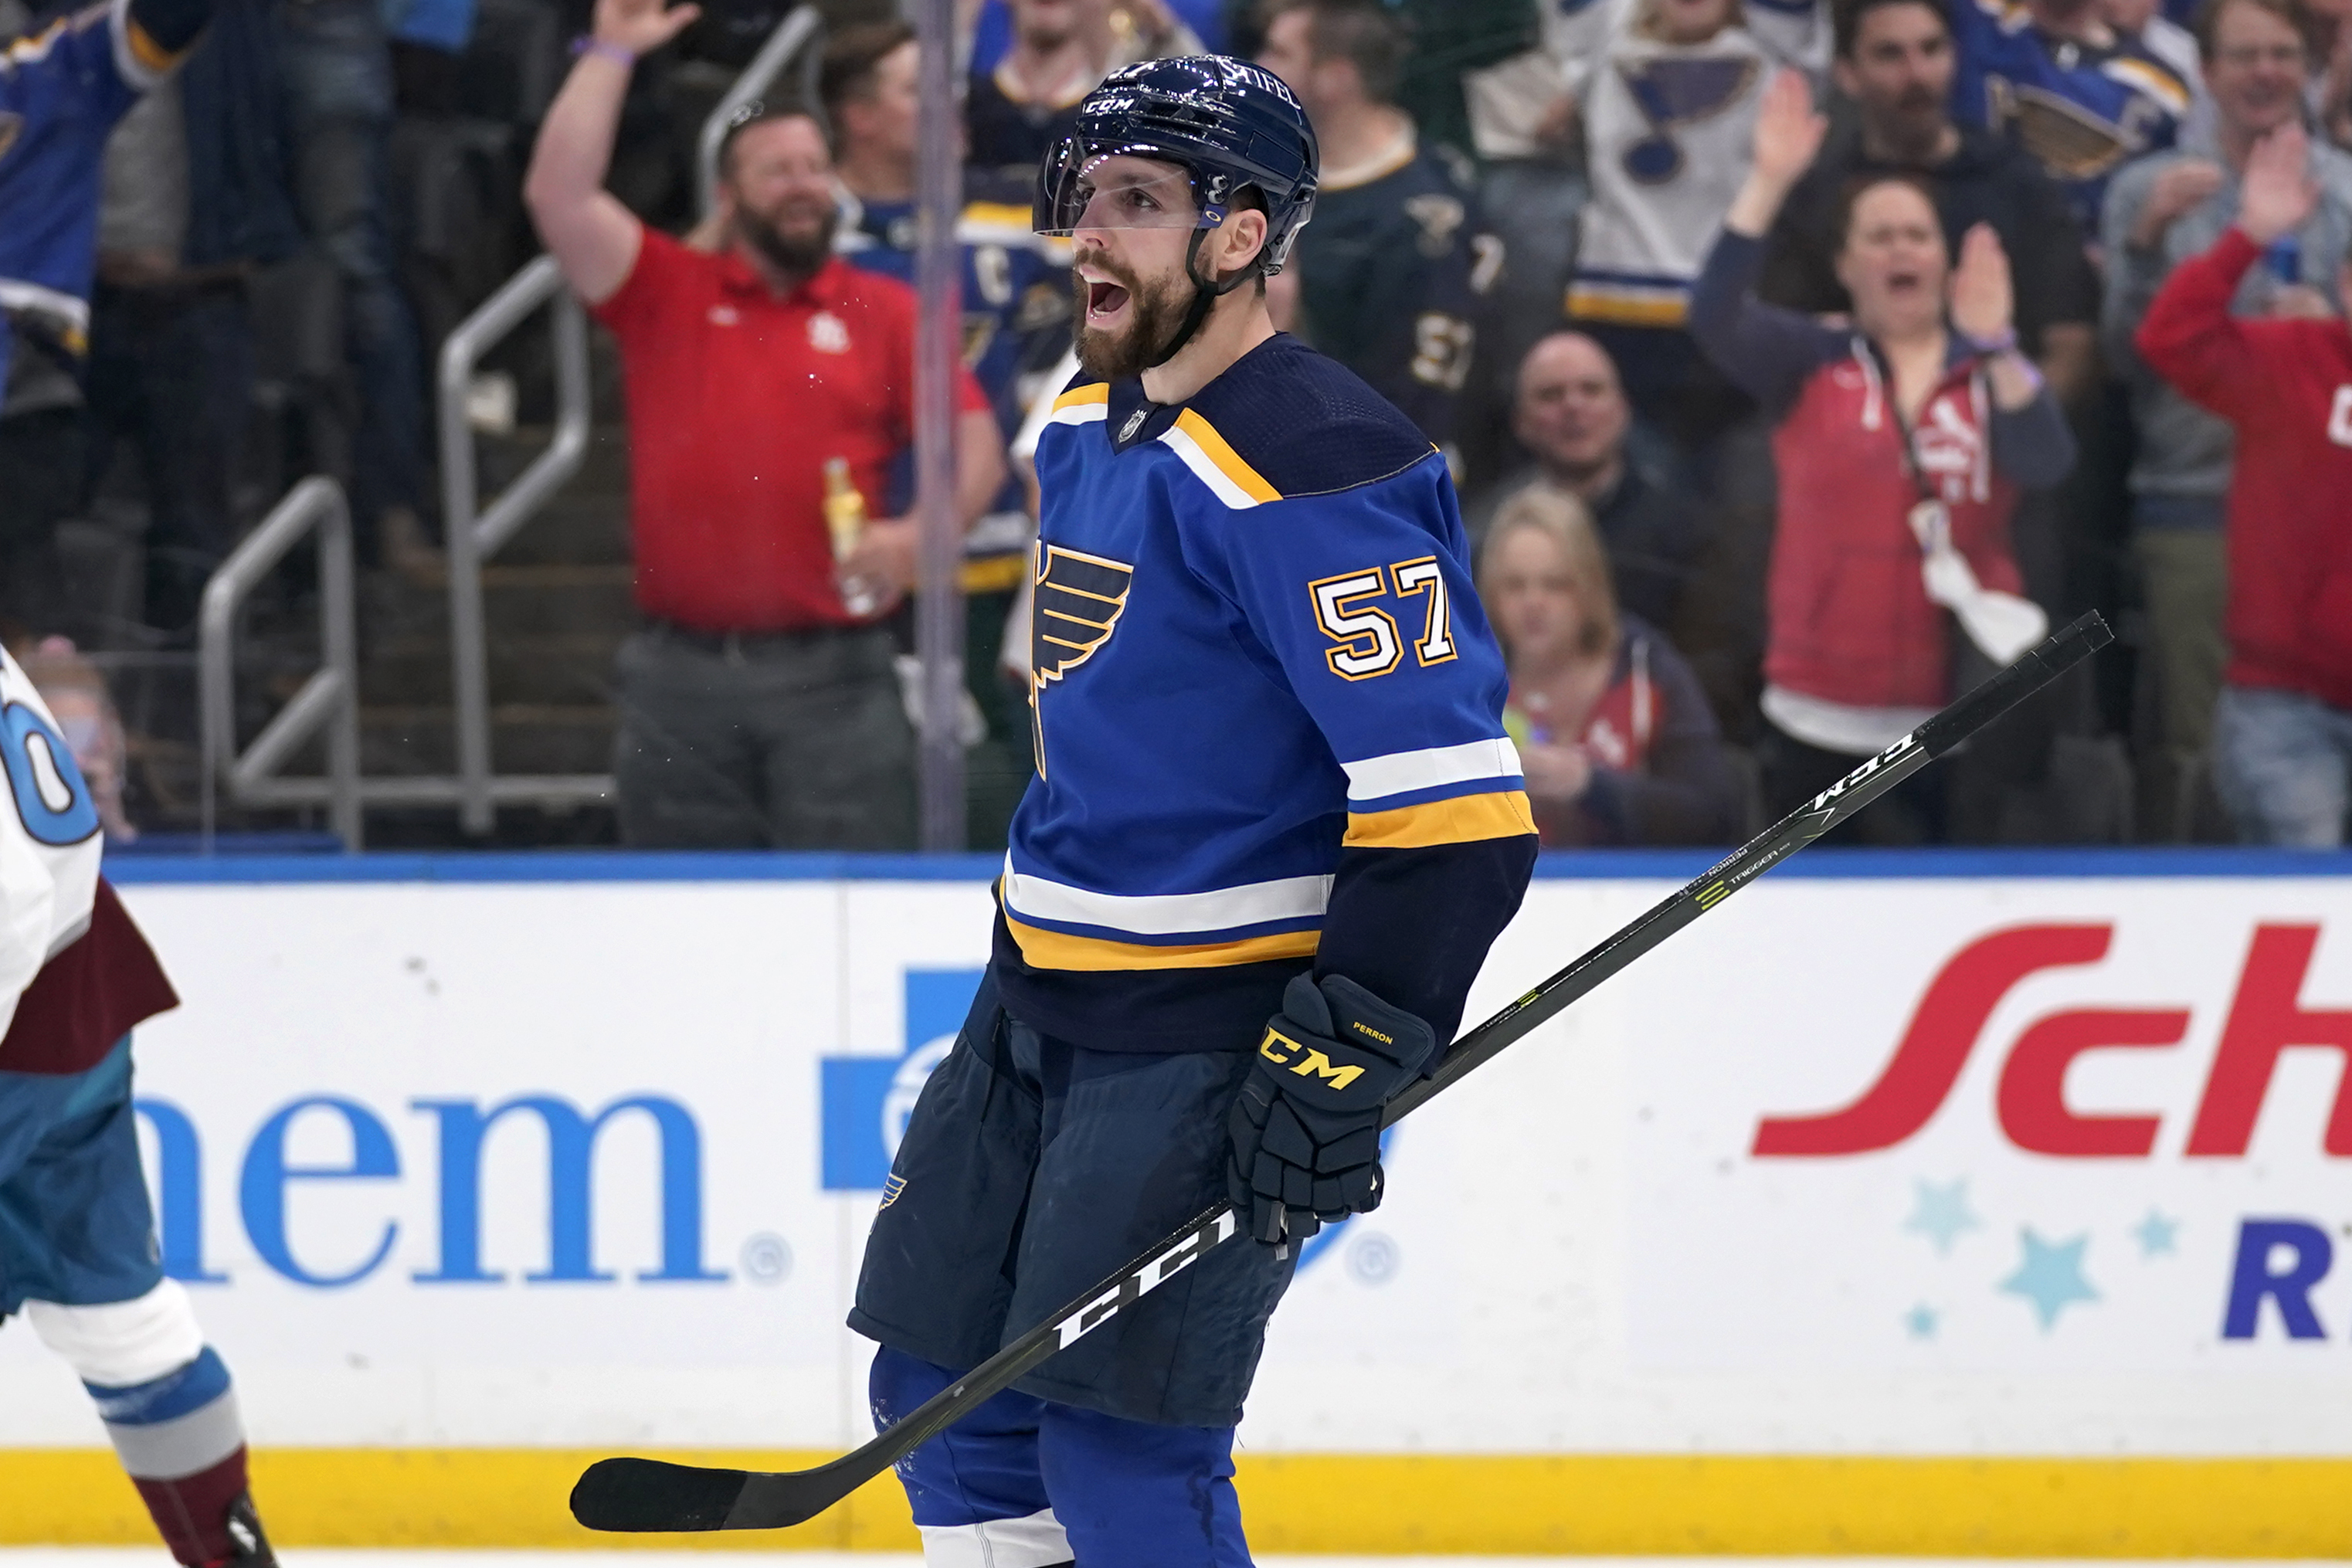 Perron signs with Red Wings after 3 Blues stints